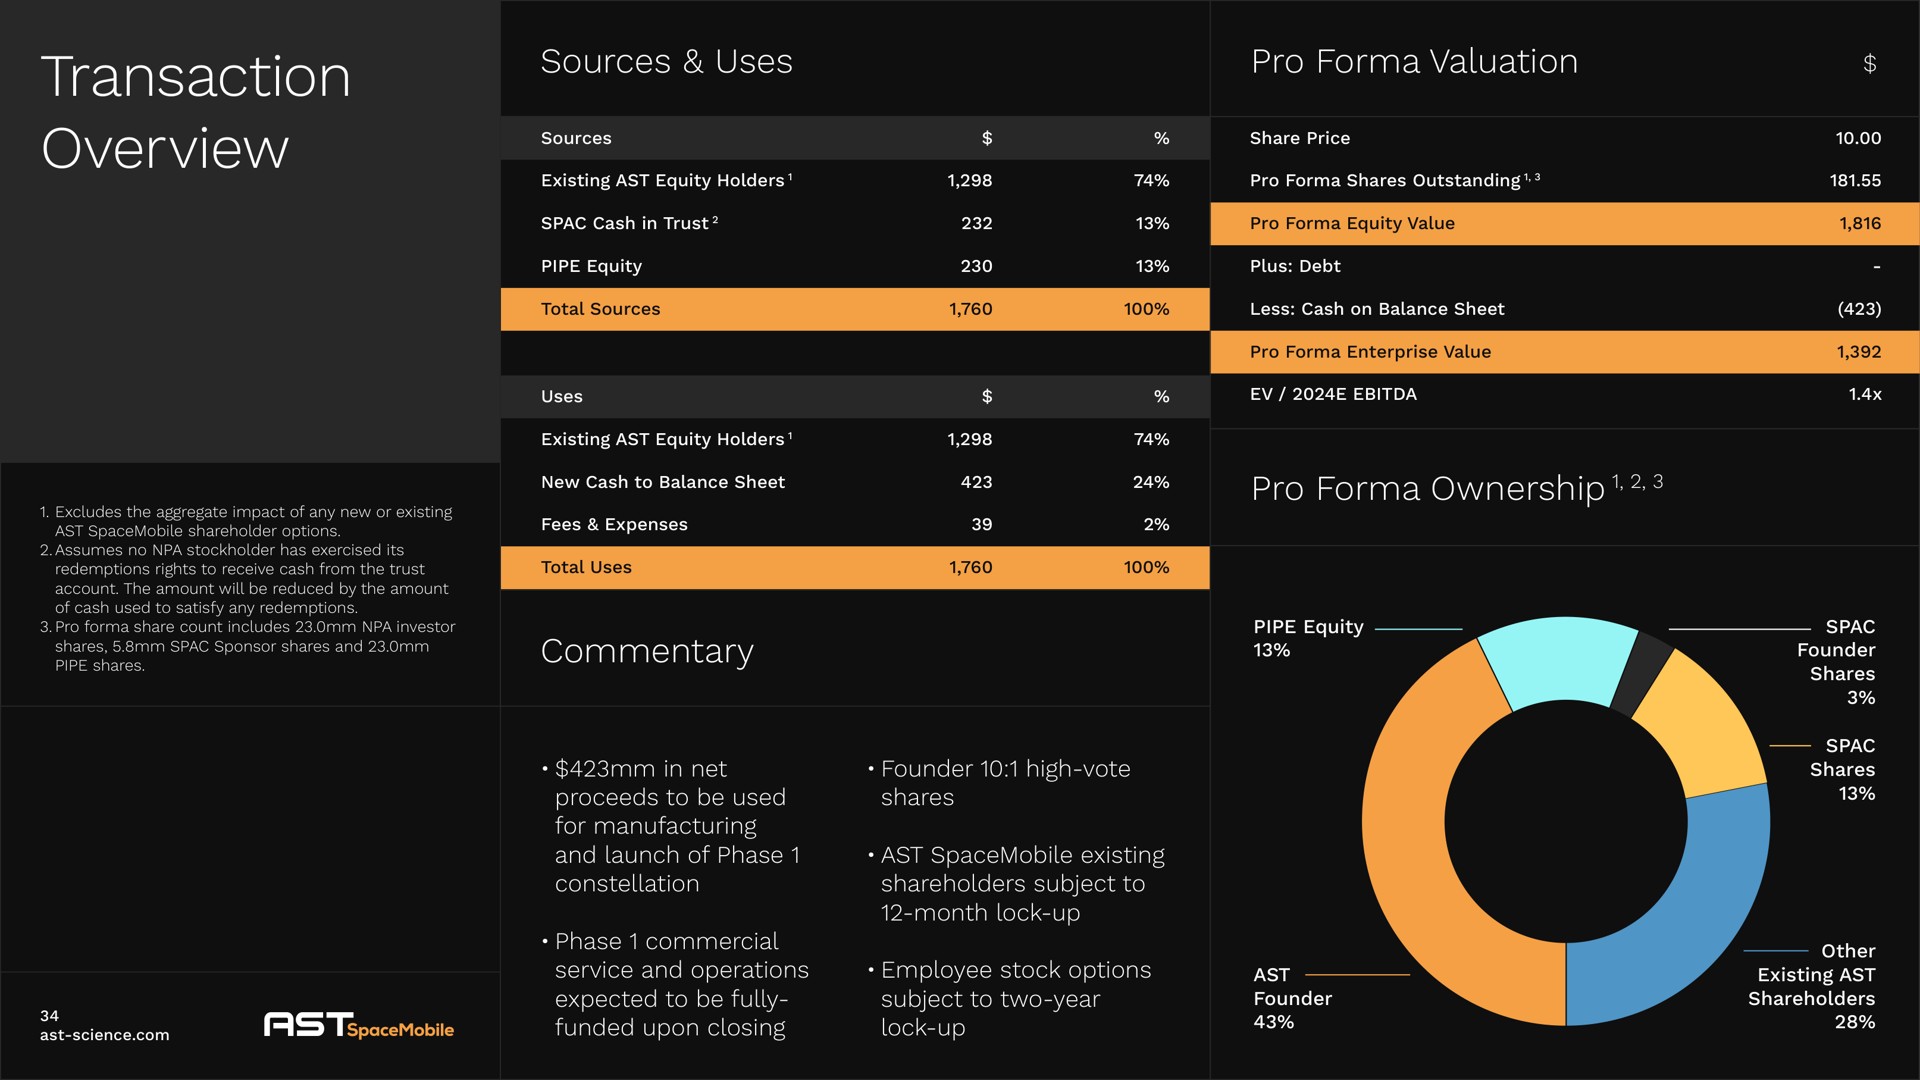 transaction overview sources uses commentary pro valuation pro ownership | AST SpaceMobile